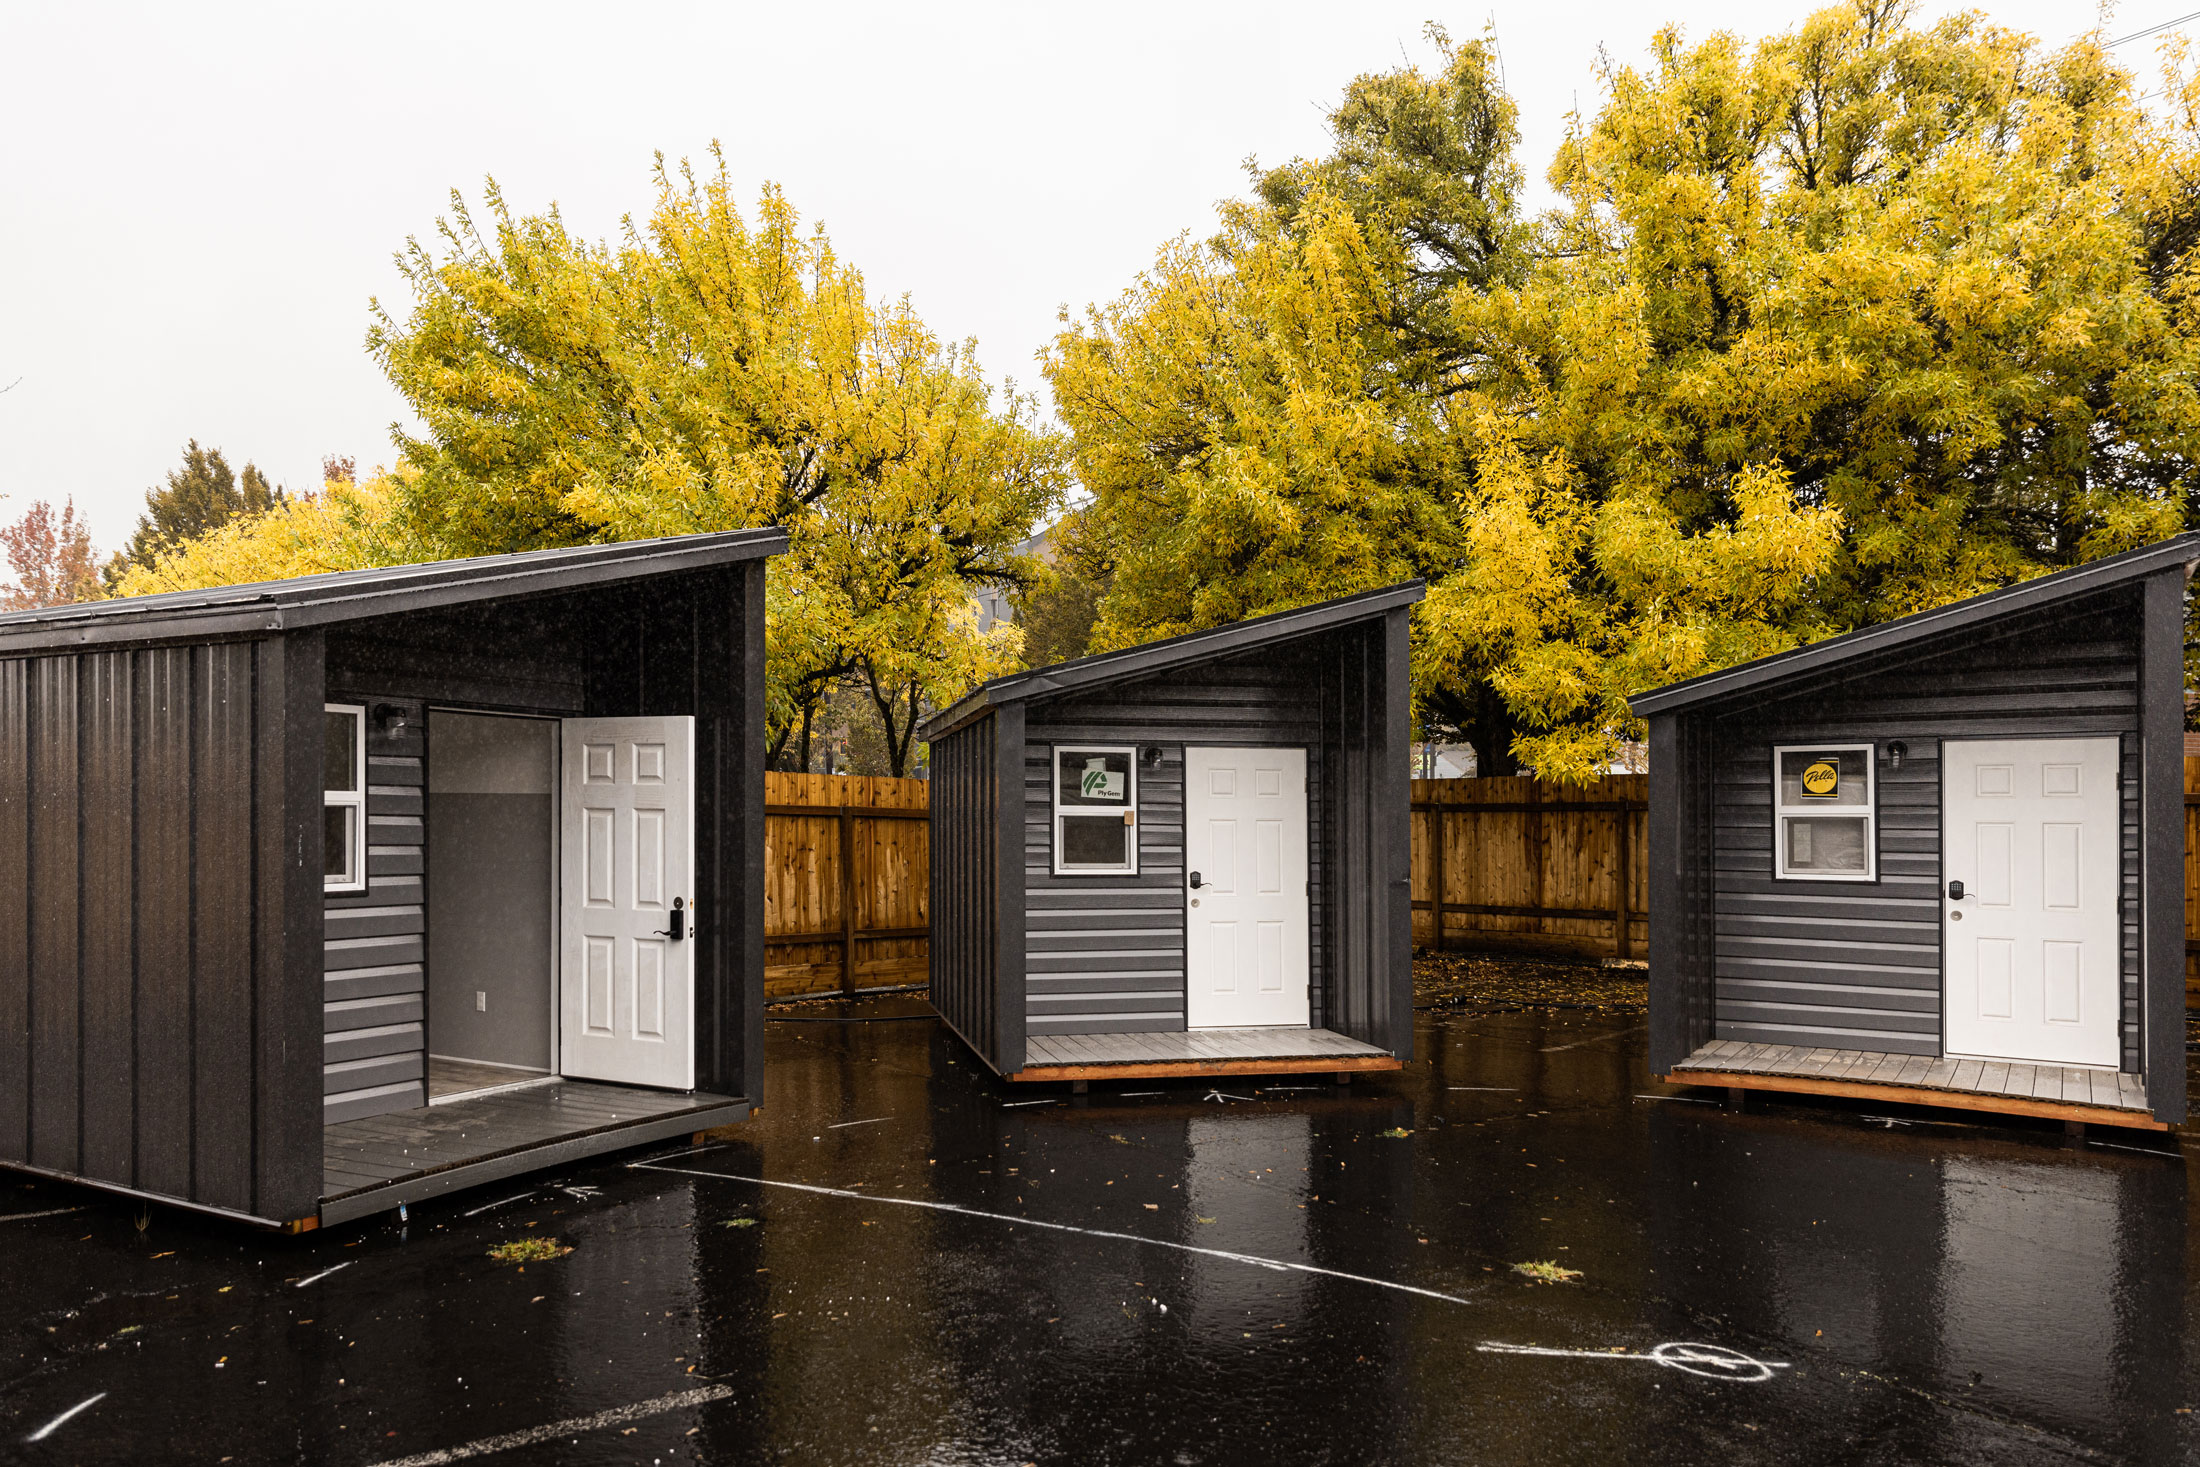 Couple Builds Tiny Home to Live in their Portland Backyard